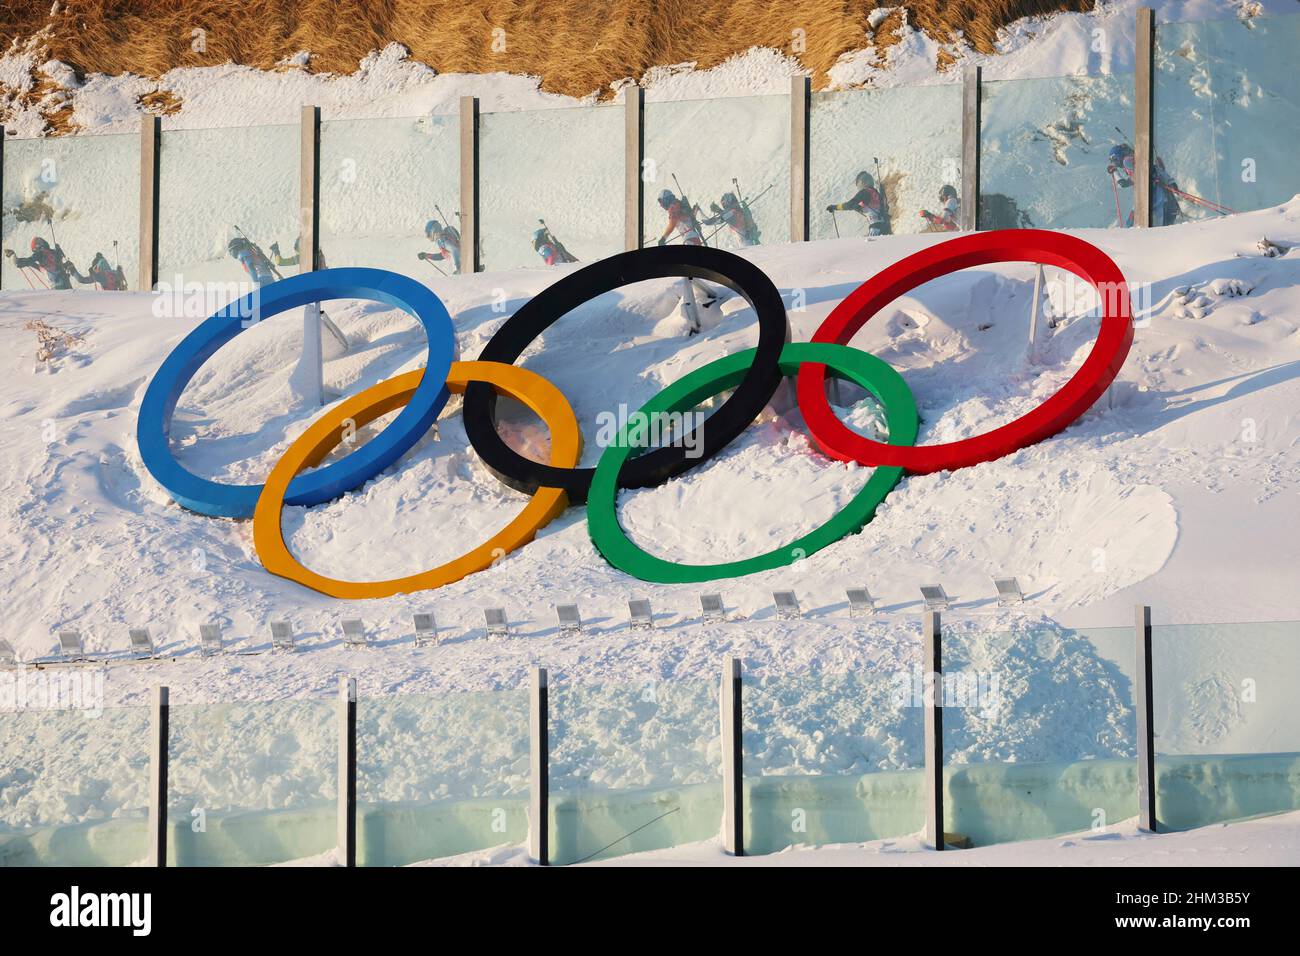 General view, Biathlon track with Olympic rings FEBRUARY 5, 2022